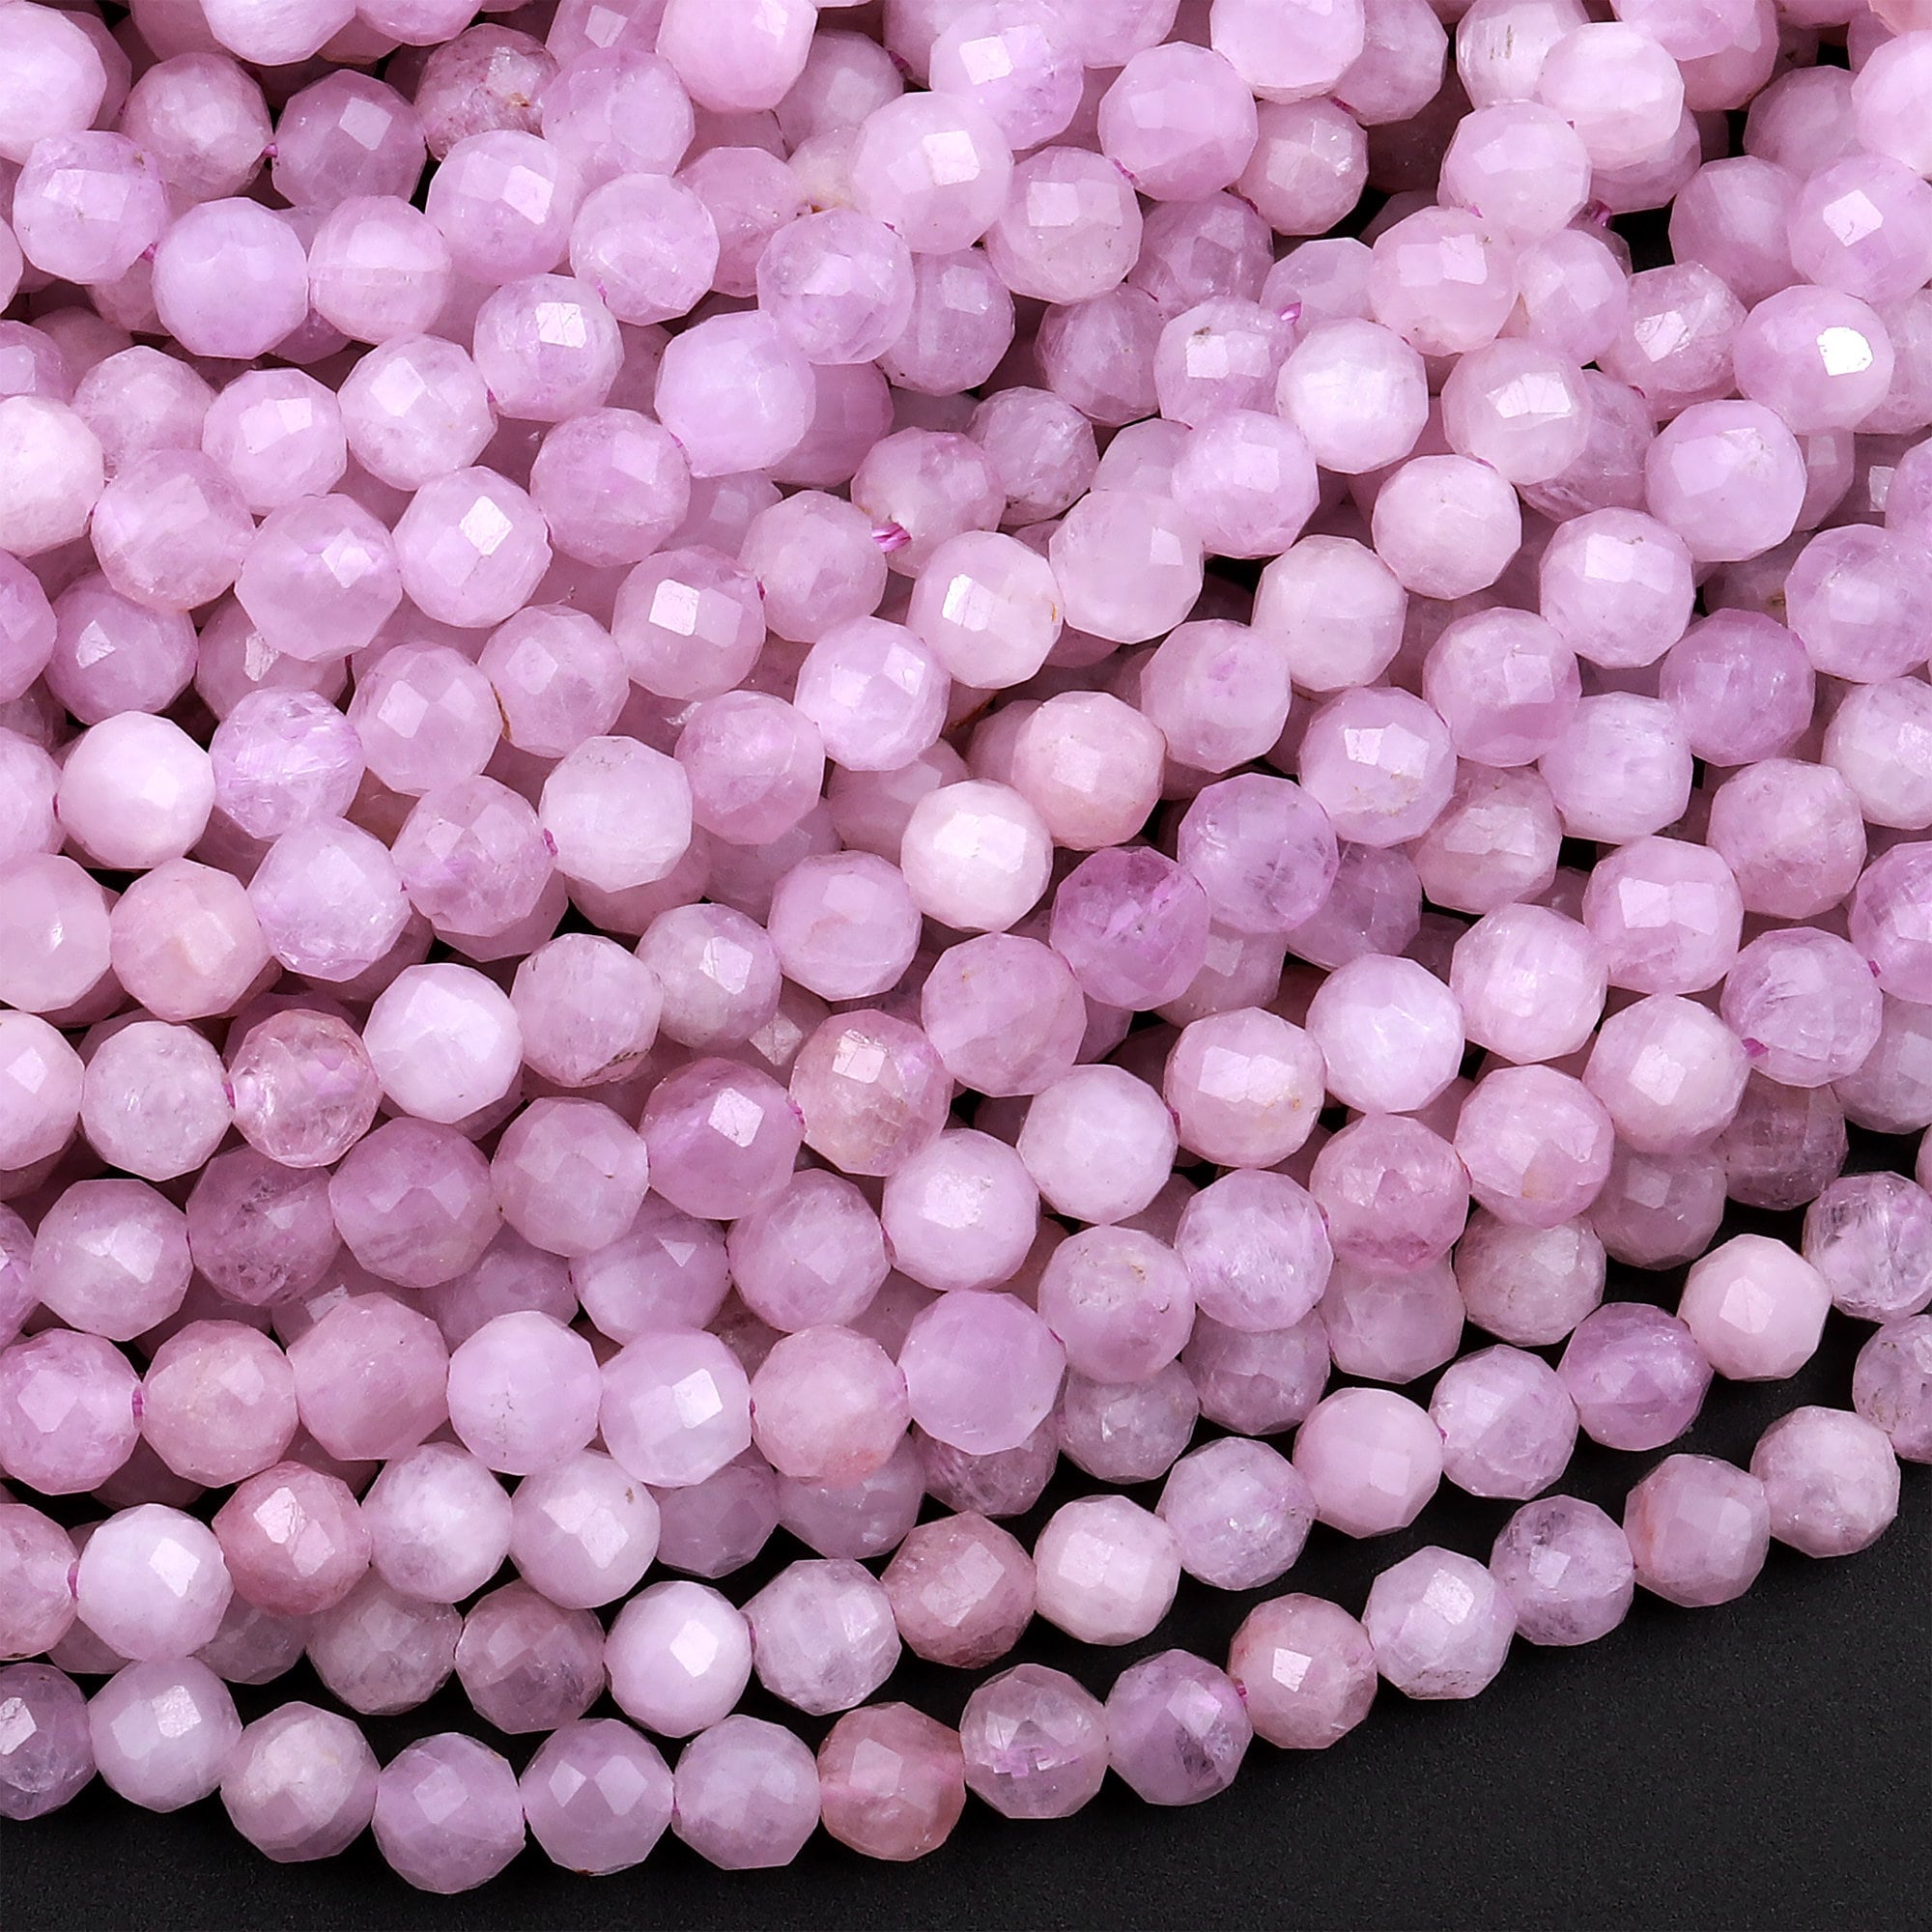 100 3mm Faceted Round Mixed Red and Purple Beads Crystal Beads by Smileyboy | Michaels